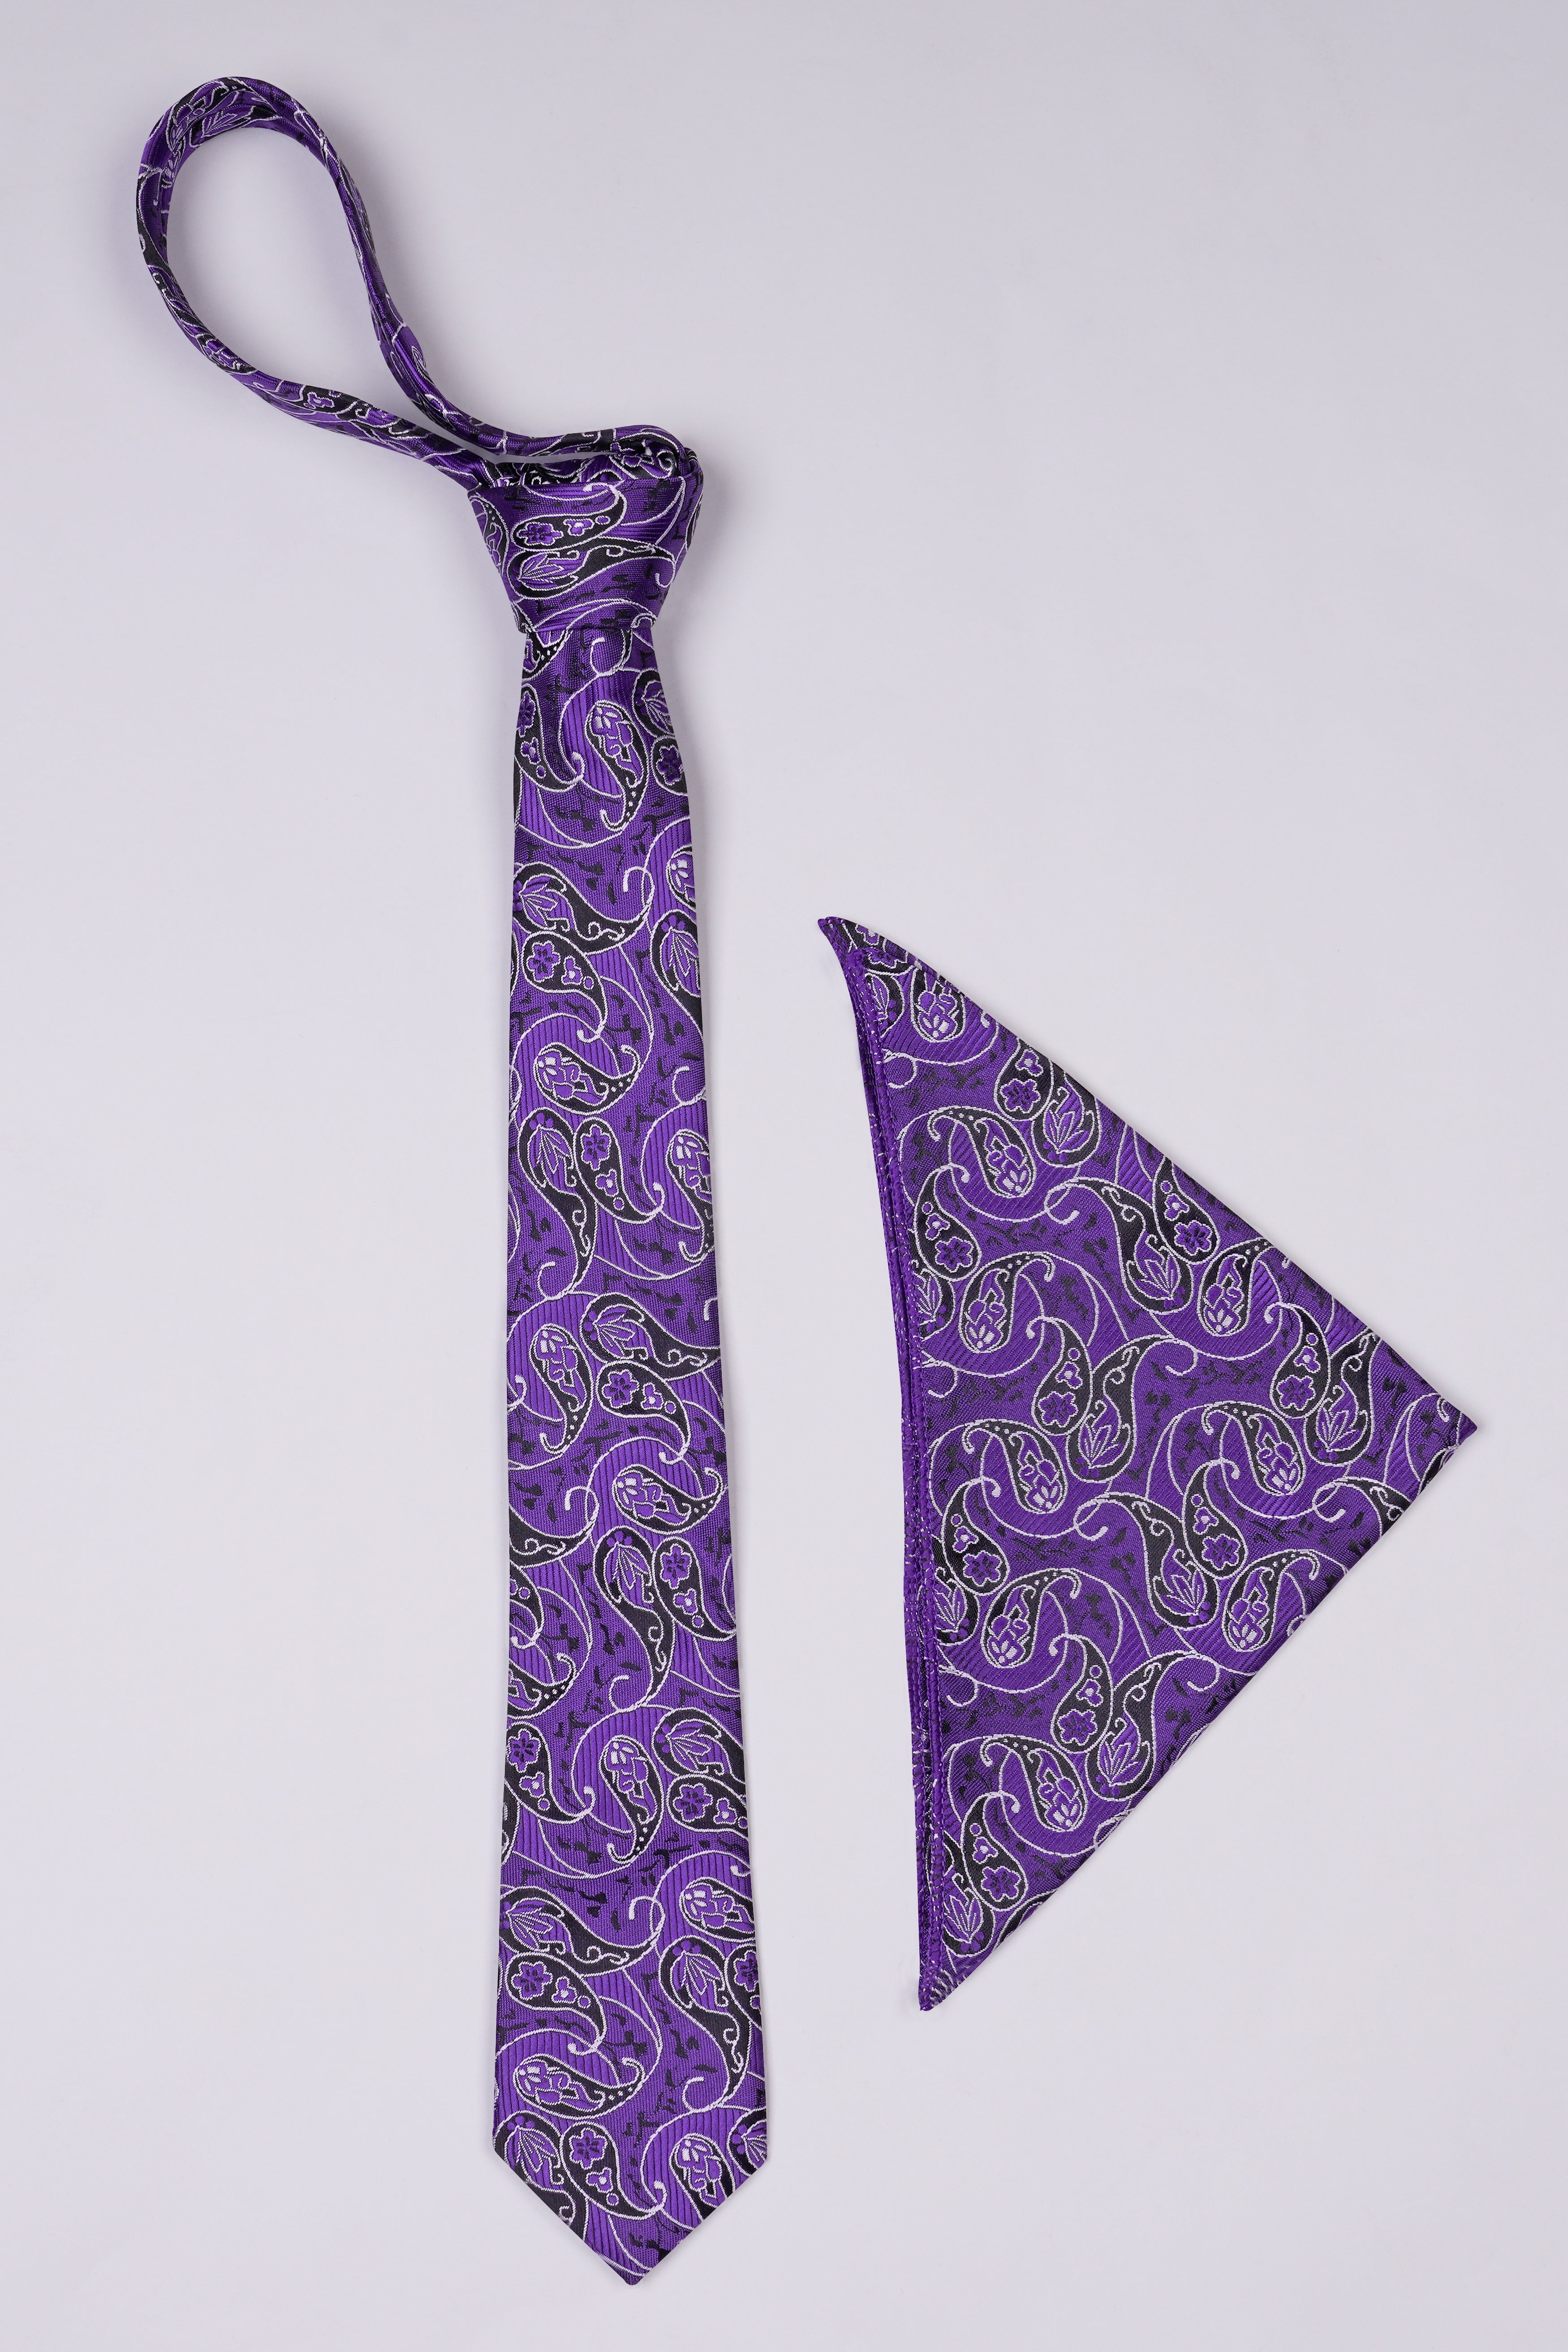 Scampi Purple with Black and White Paisley Jacquard Tie with Pocket Square  TP052